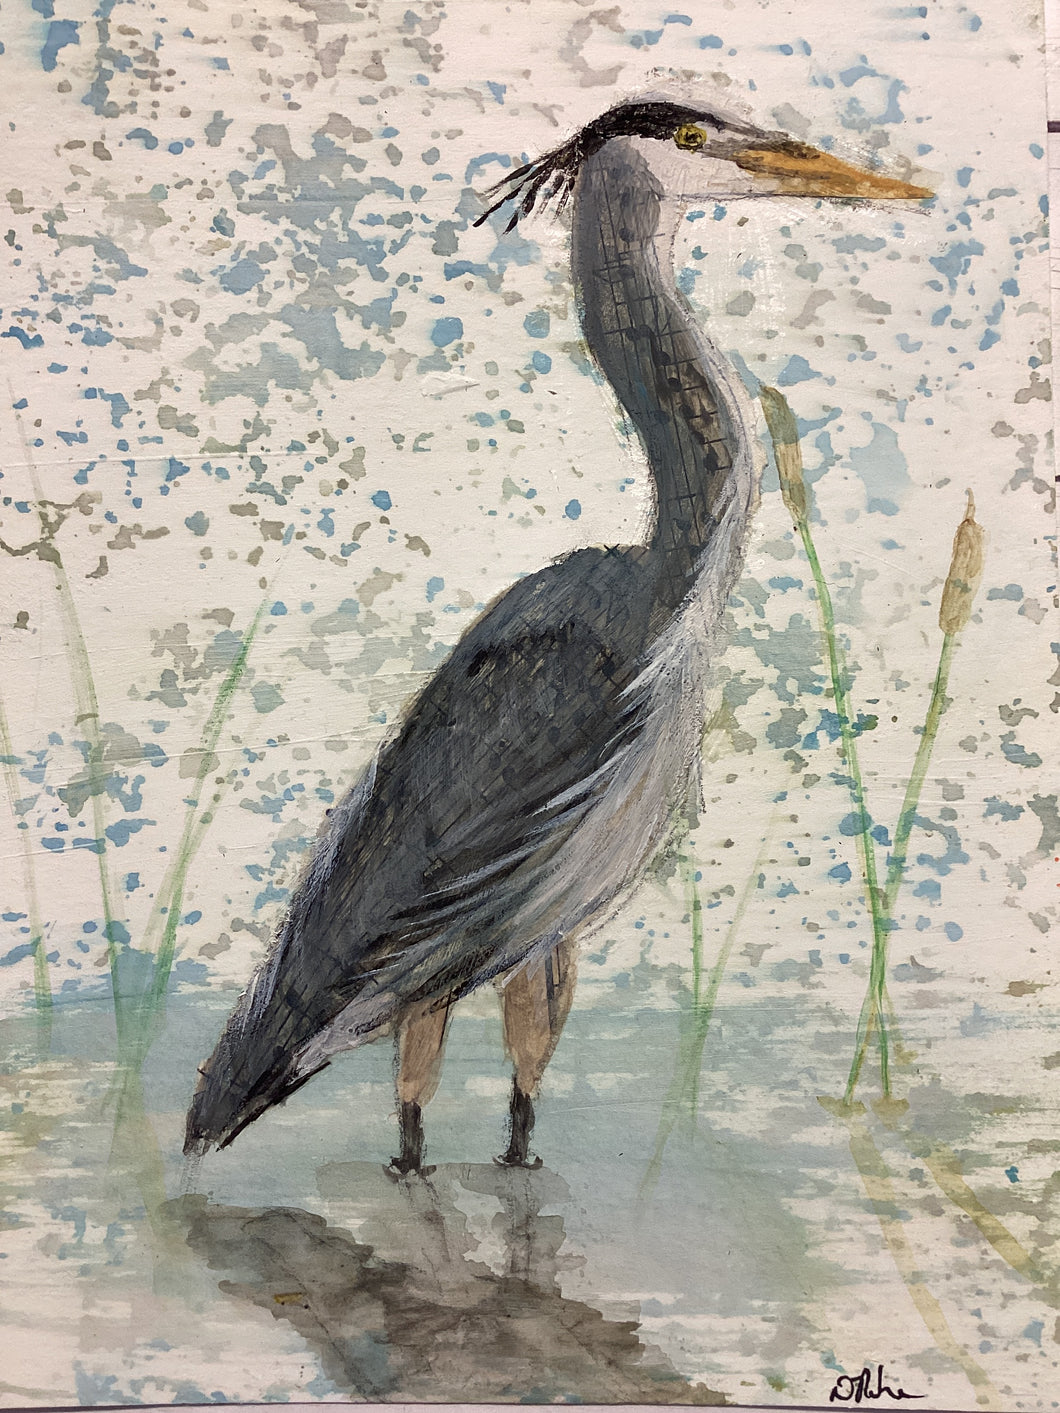 Great Blue Heron, 5 x7 original mixed media painting, Day 21 of 100